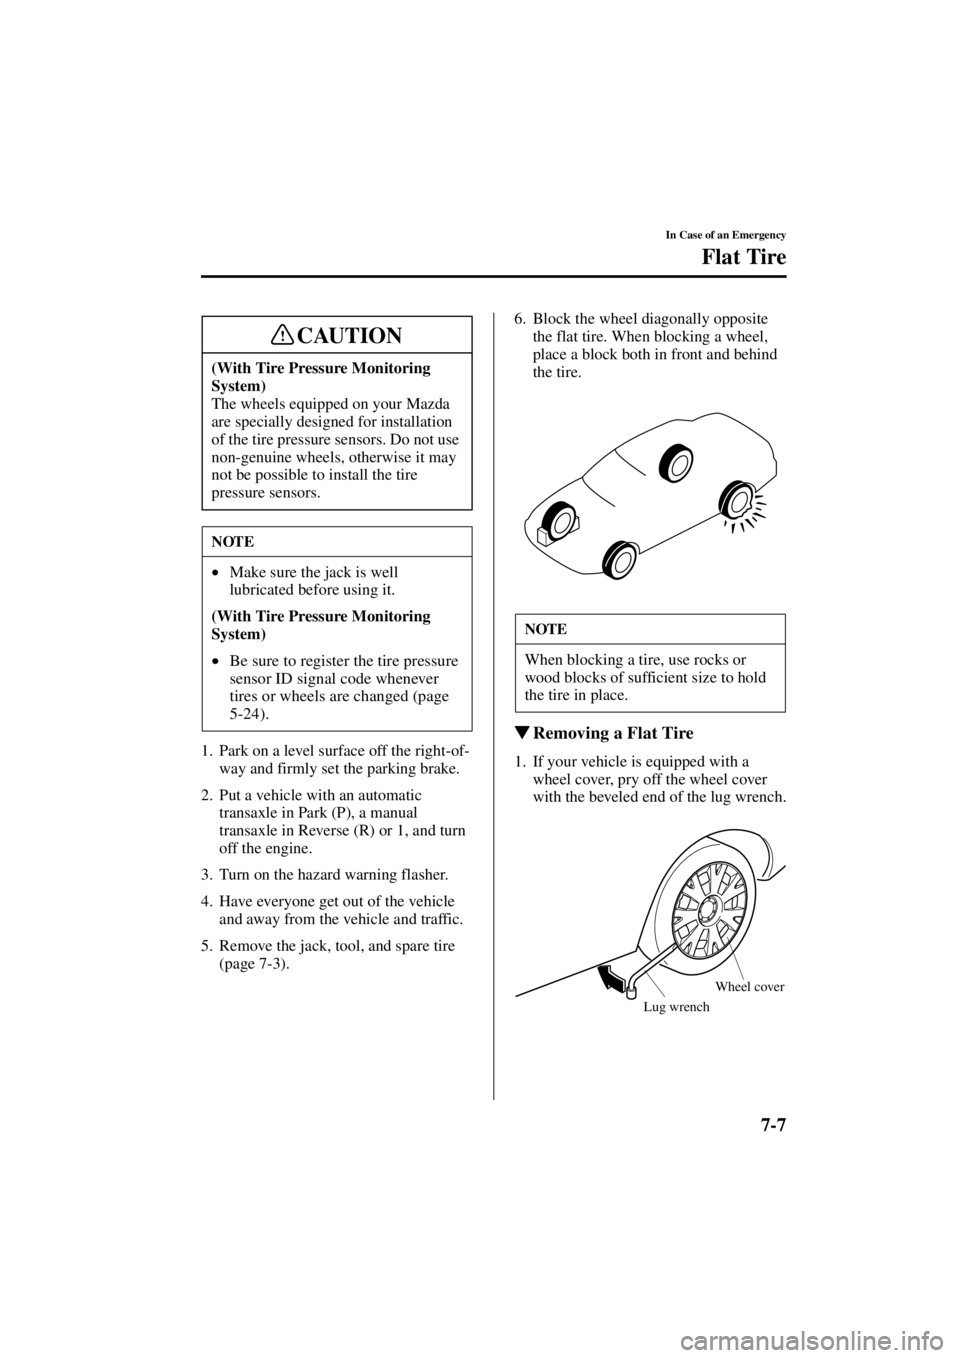 MAZDA MODEL 3 5-DOOR 2004 User Guide 7-7
In Case of an Emergency
Flat Tire
Form No. 8S18-EA-03I
1. Park on a level surface off the right-of-way and firmly set the parking brake.
2. Put a vehicle with an automatic  transaxle in Park (P), 